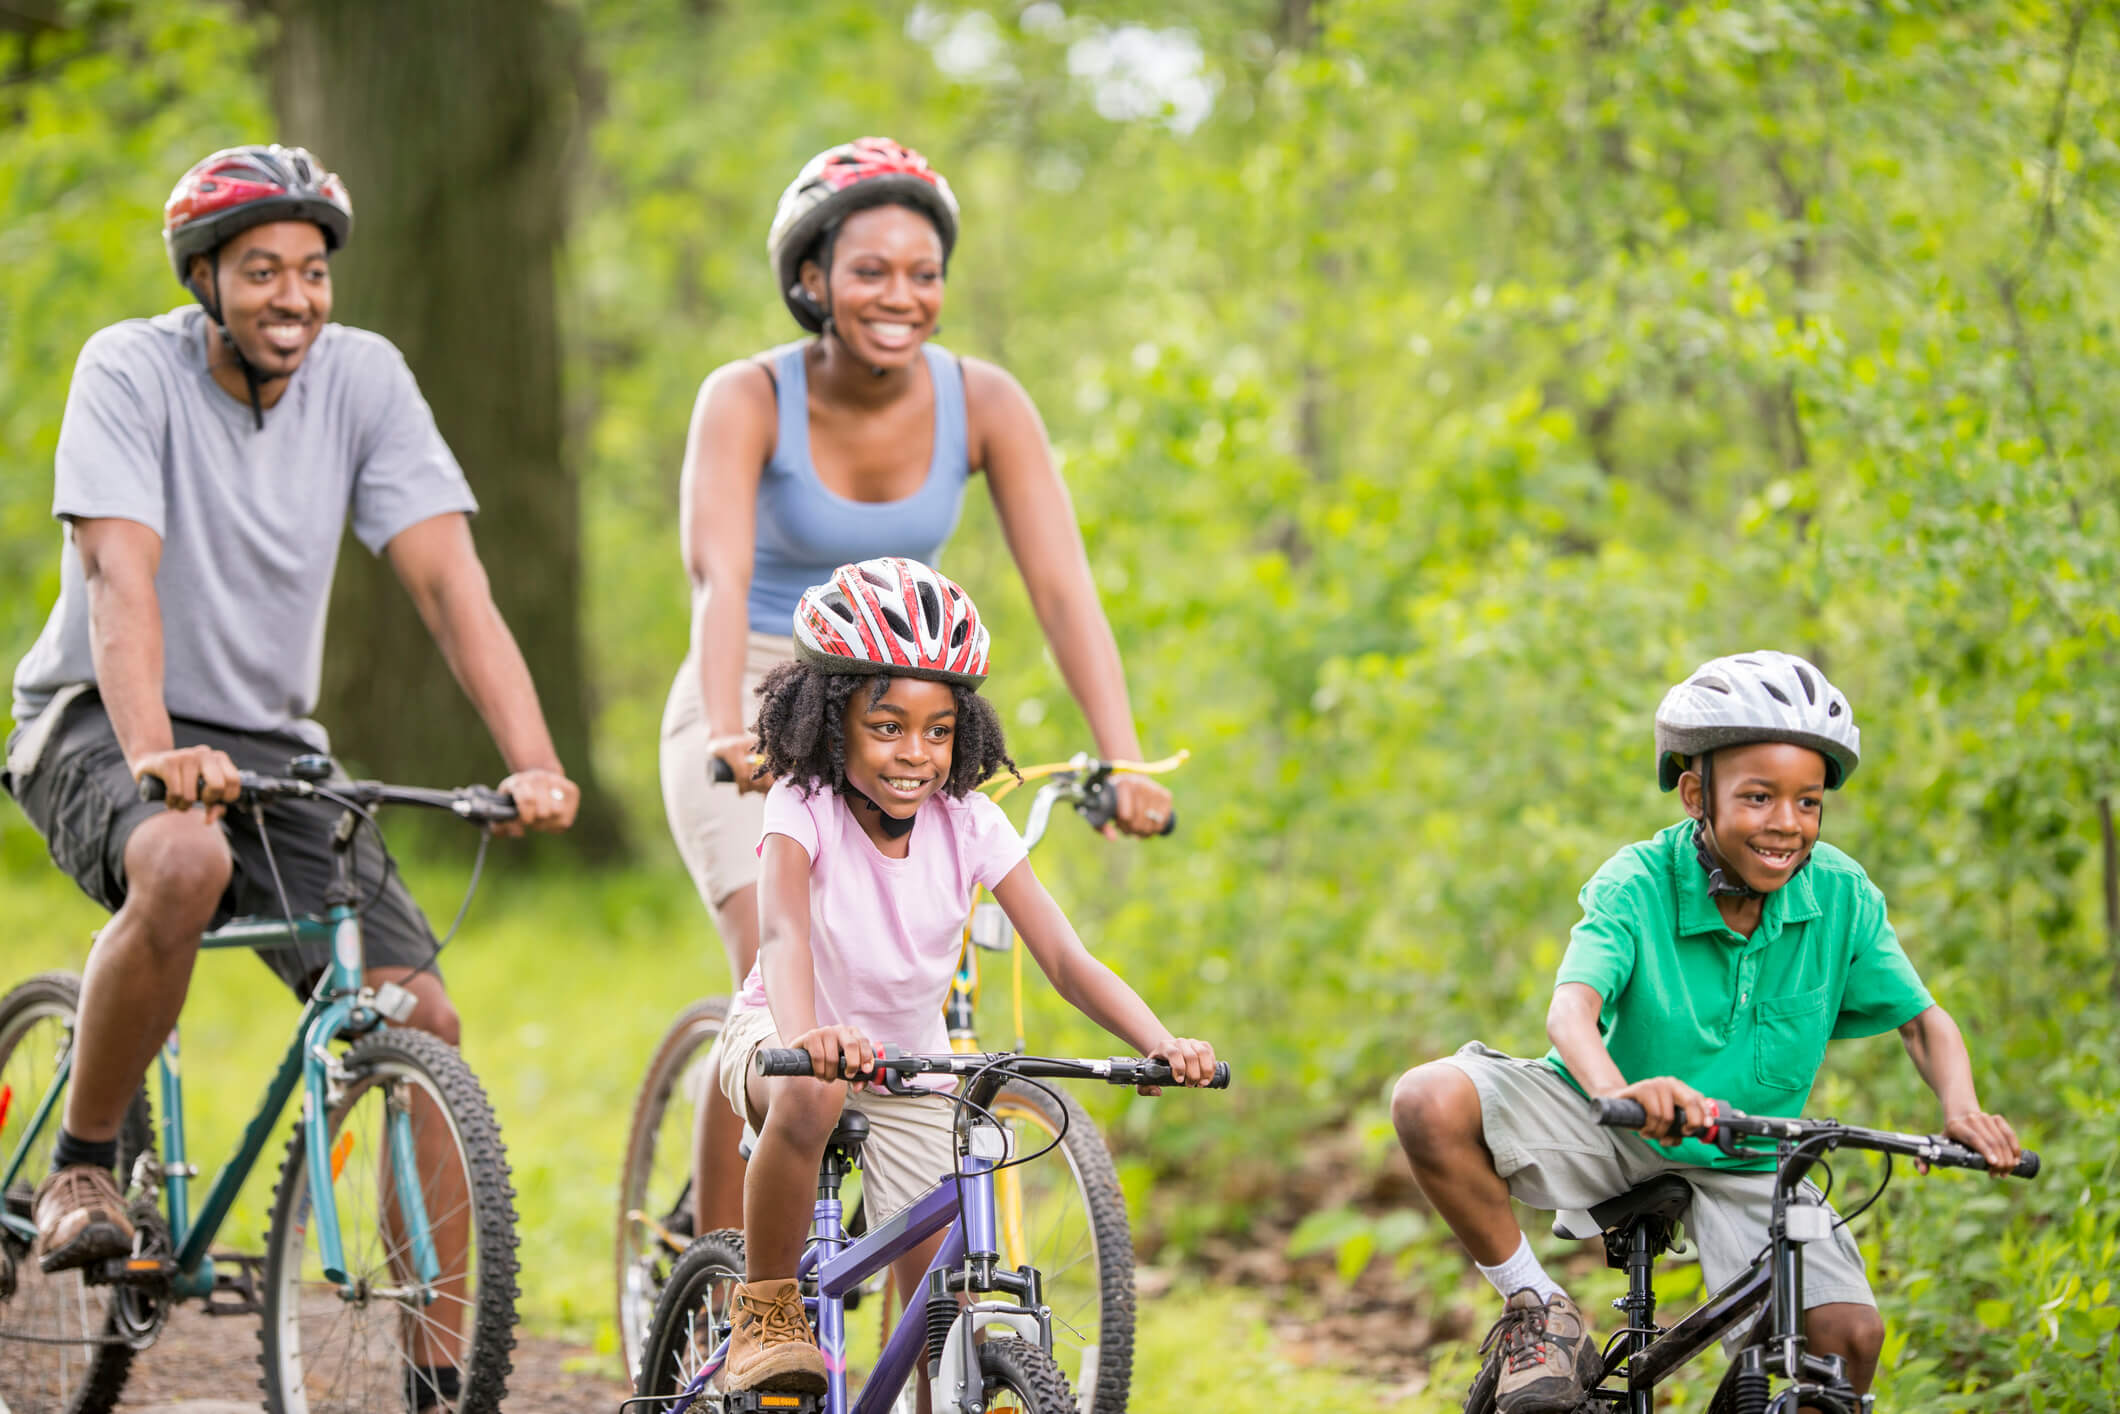 A family is going on a bike ride through the woods while on summer vacation.